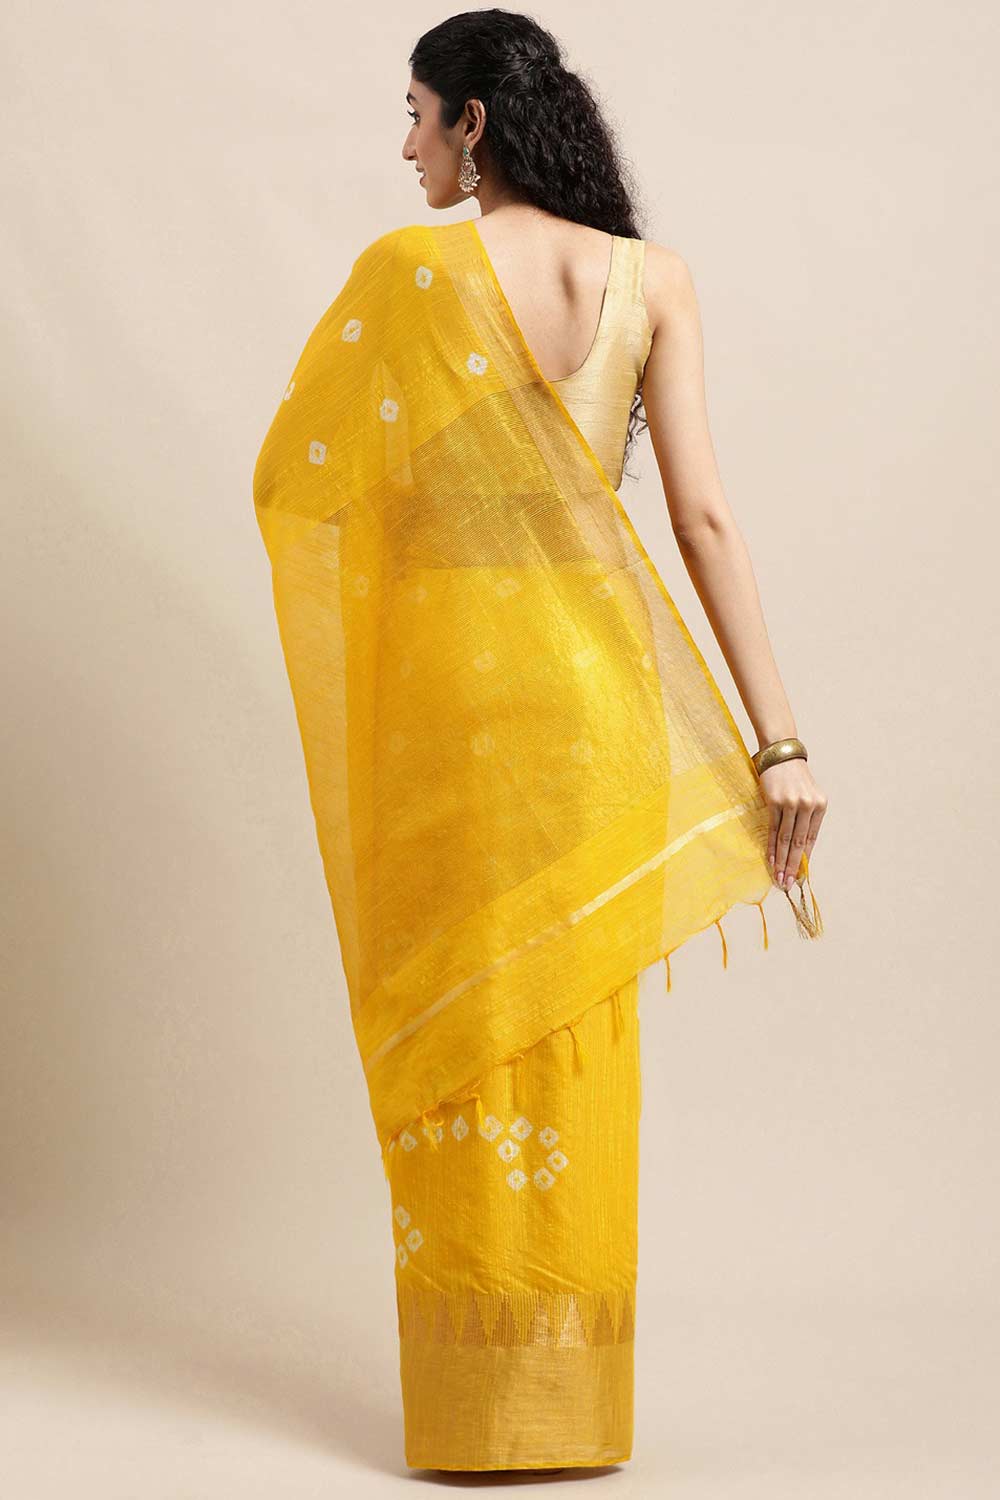 Shop Madhuri Yellow Zari Woven Blended Silk One Minute Saree at best offer at our  Store - One Minute Saree